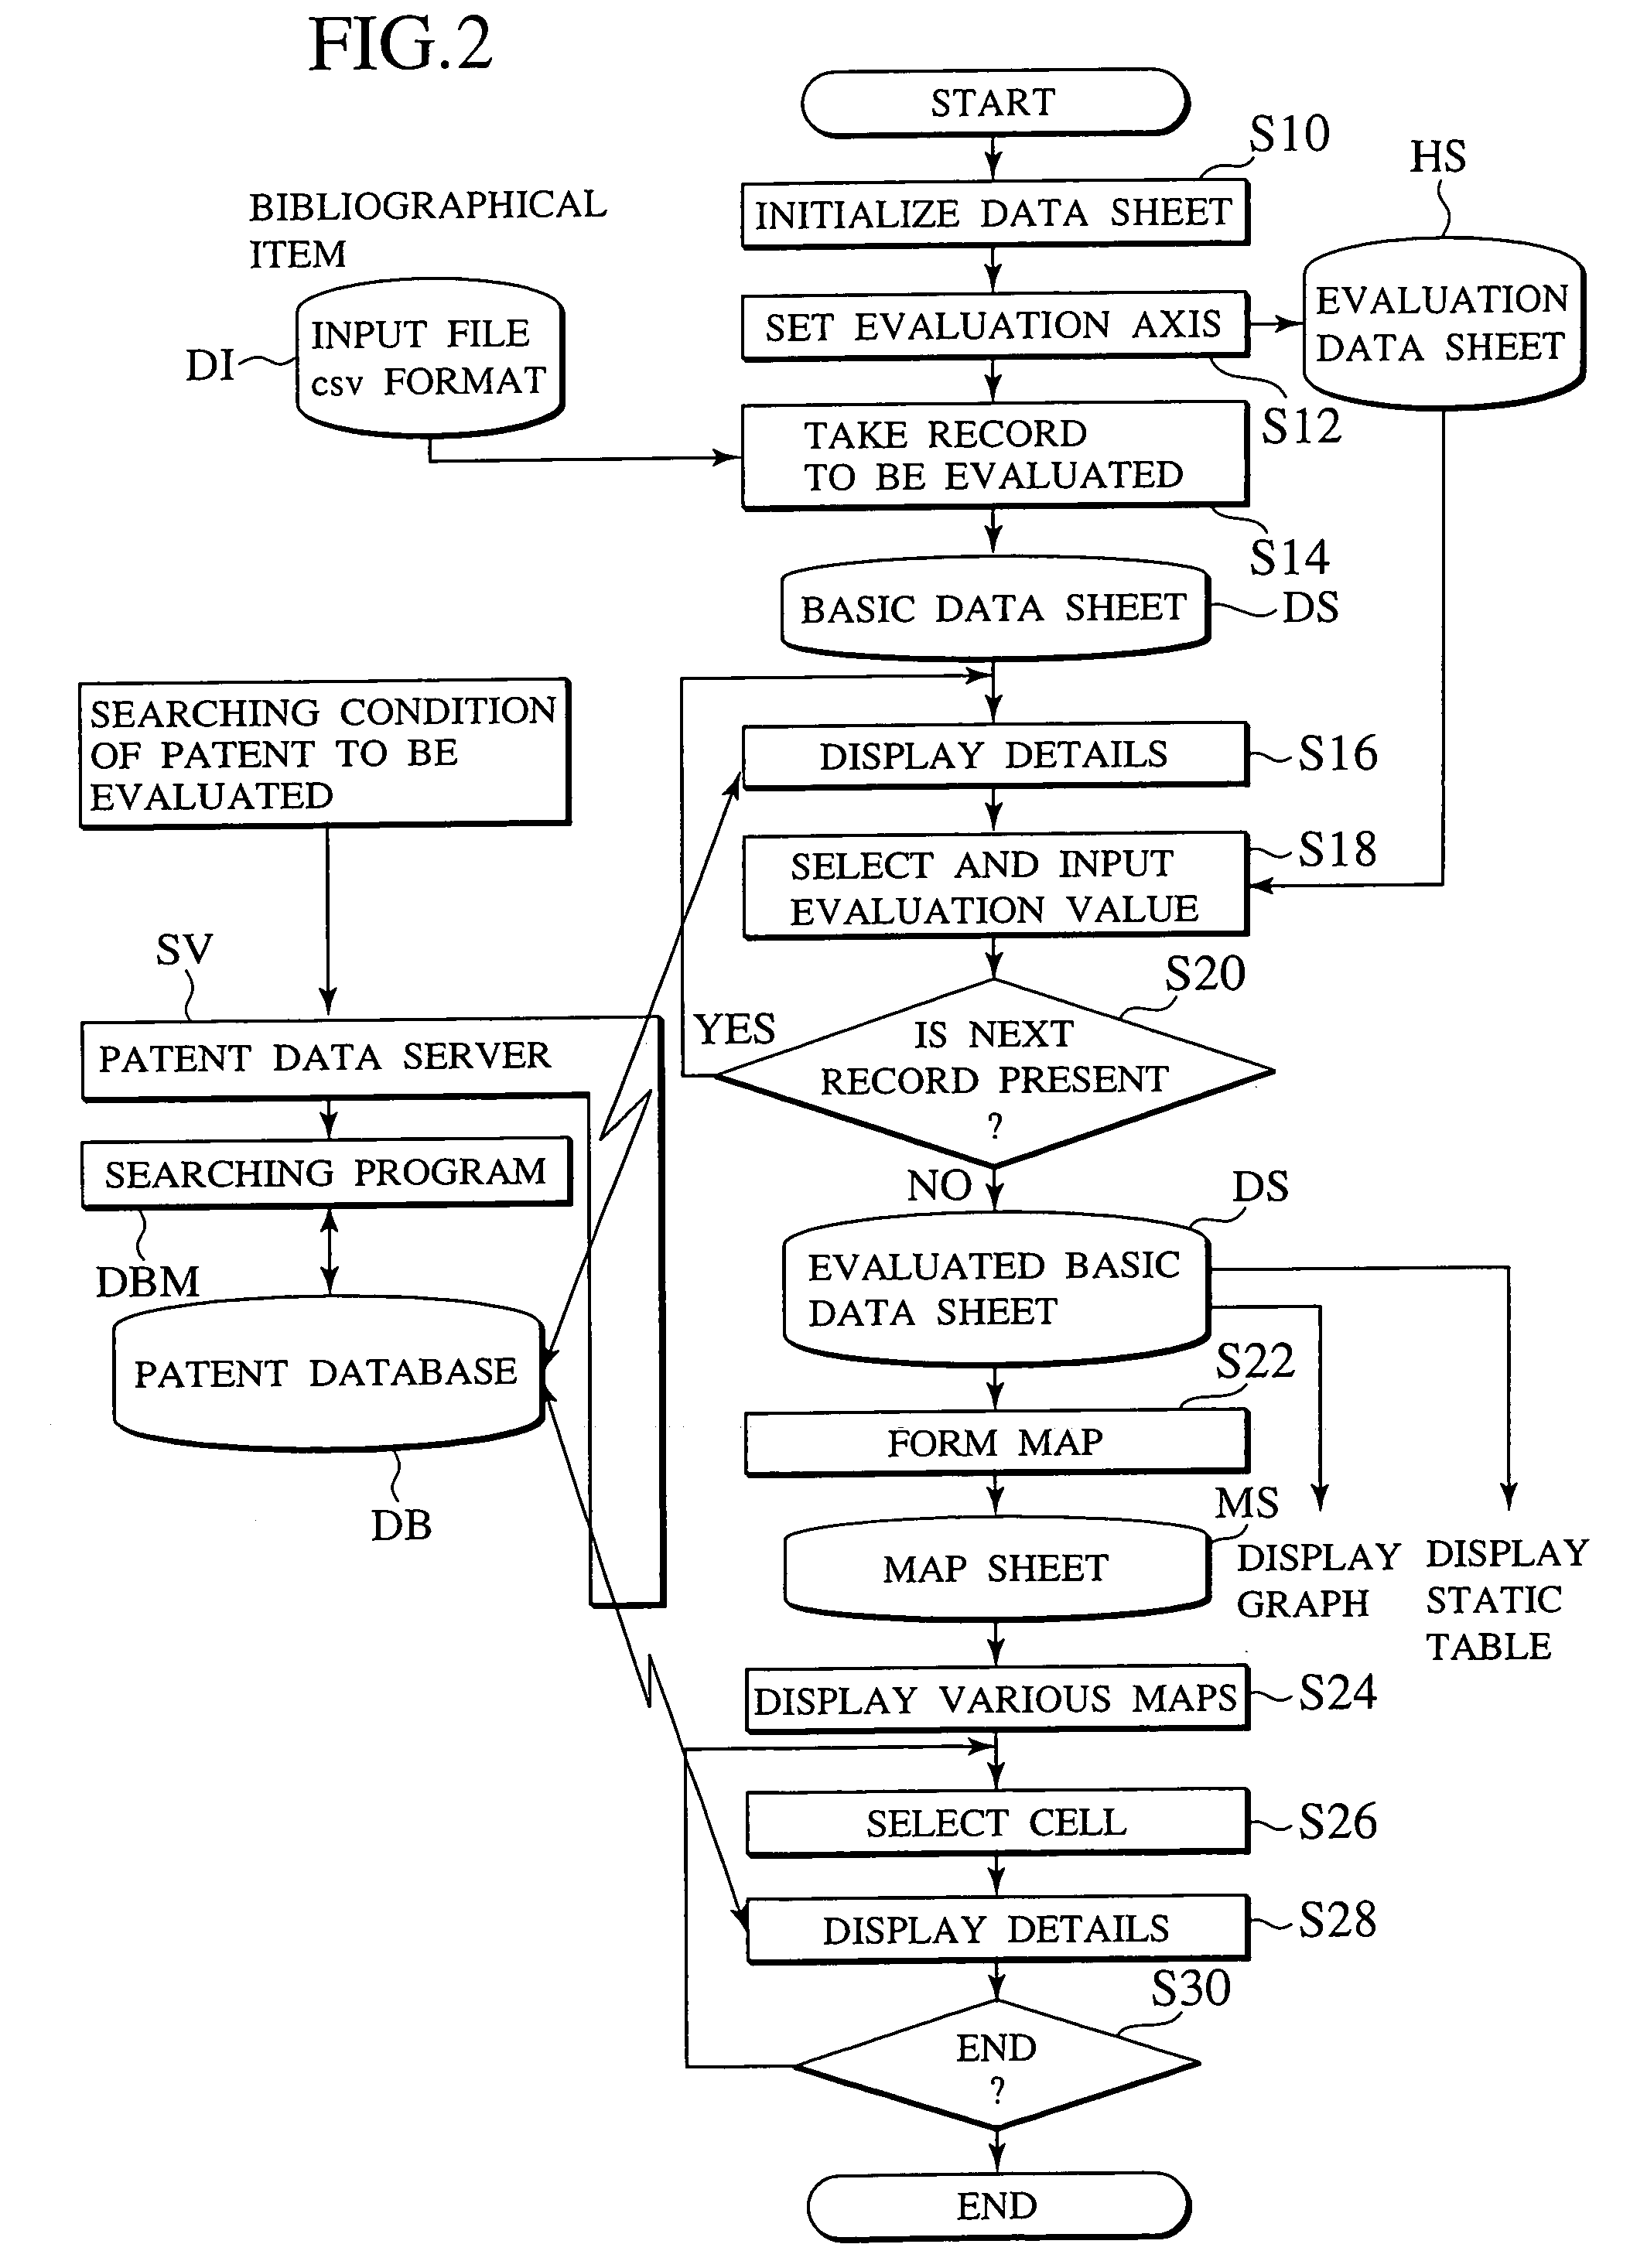 Data map forming system and method of forming a data map based on evaluation values